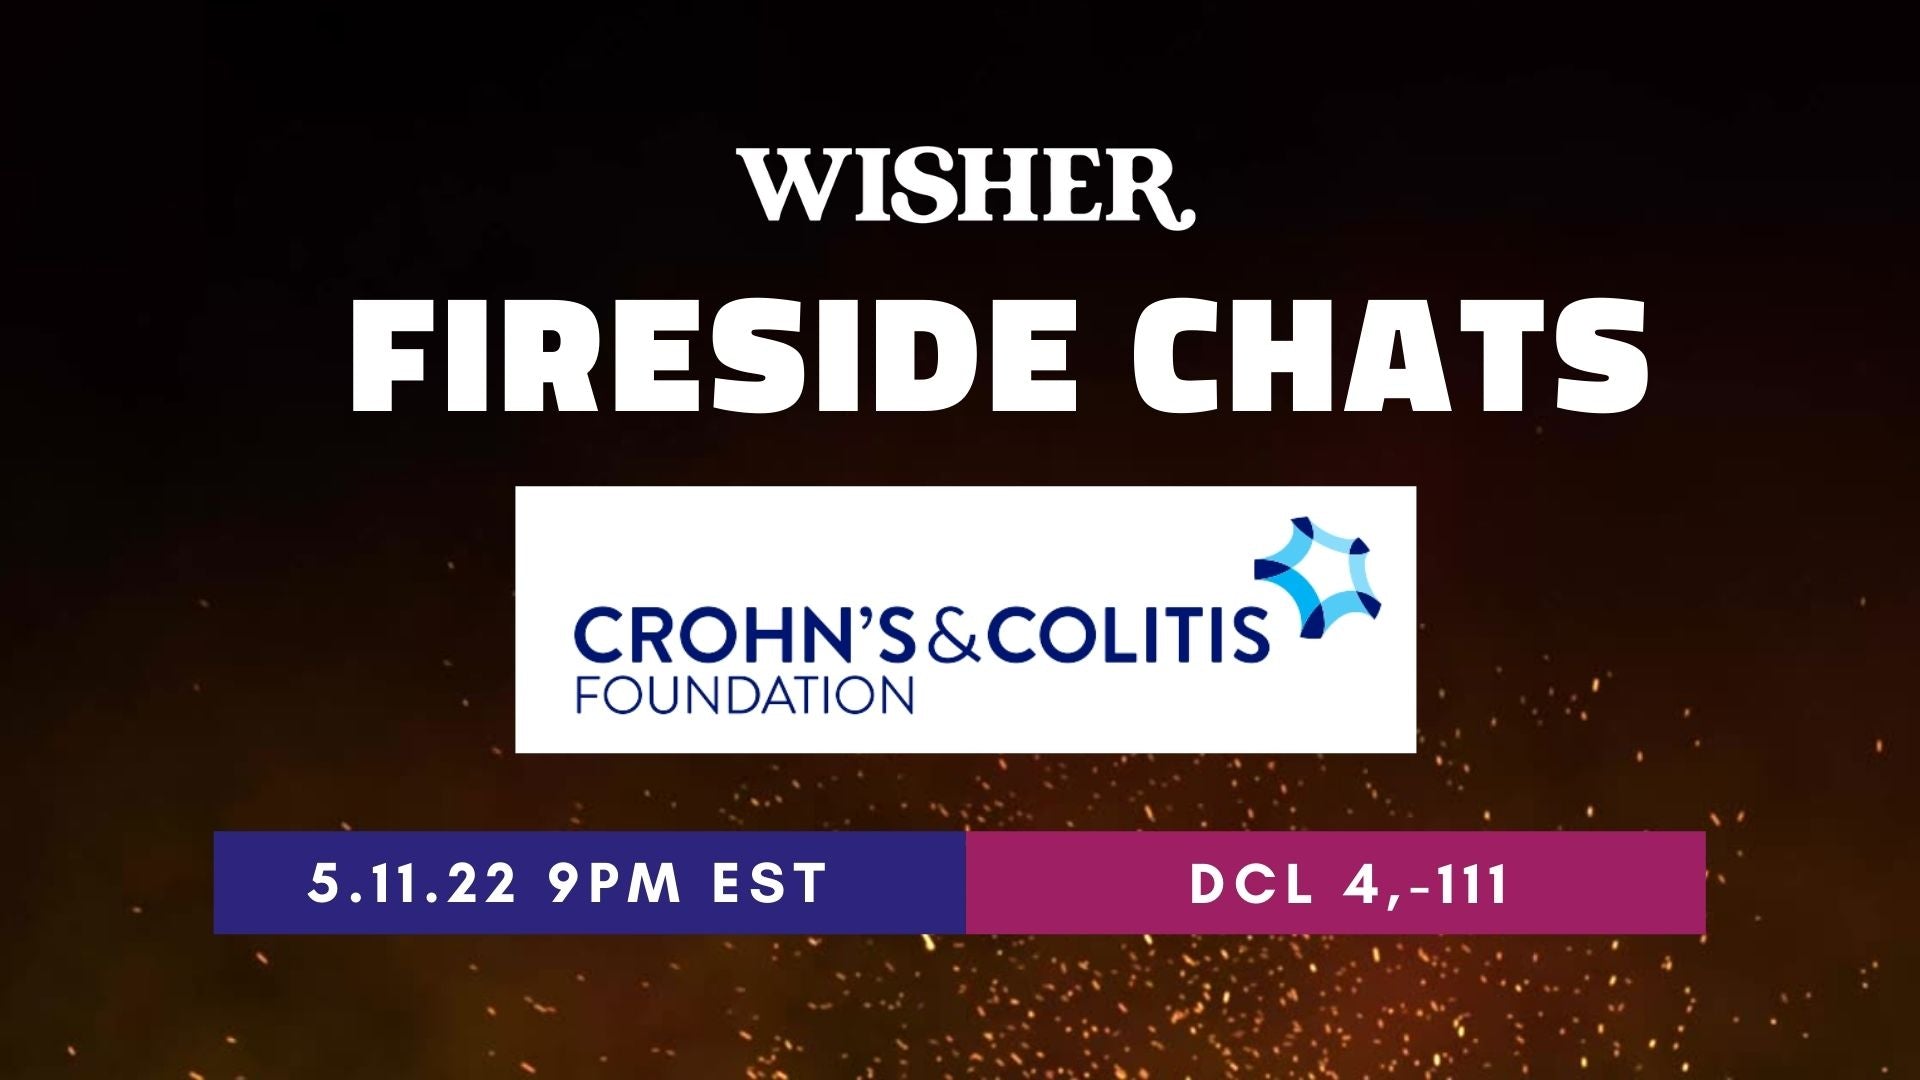 Crohn's and Colitis foundation fireside chat with Wisher Vodka